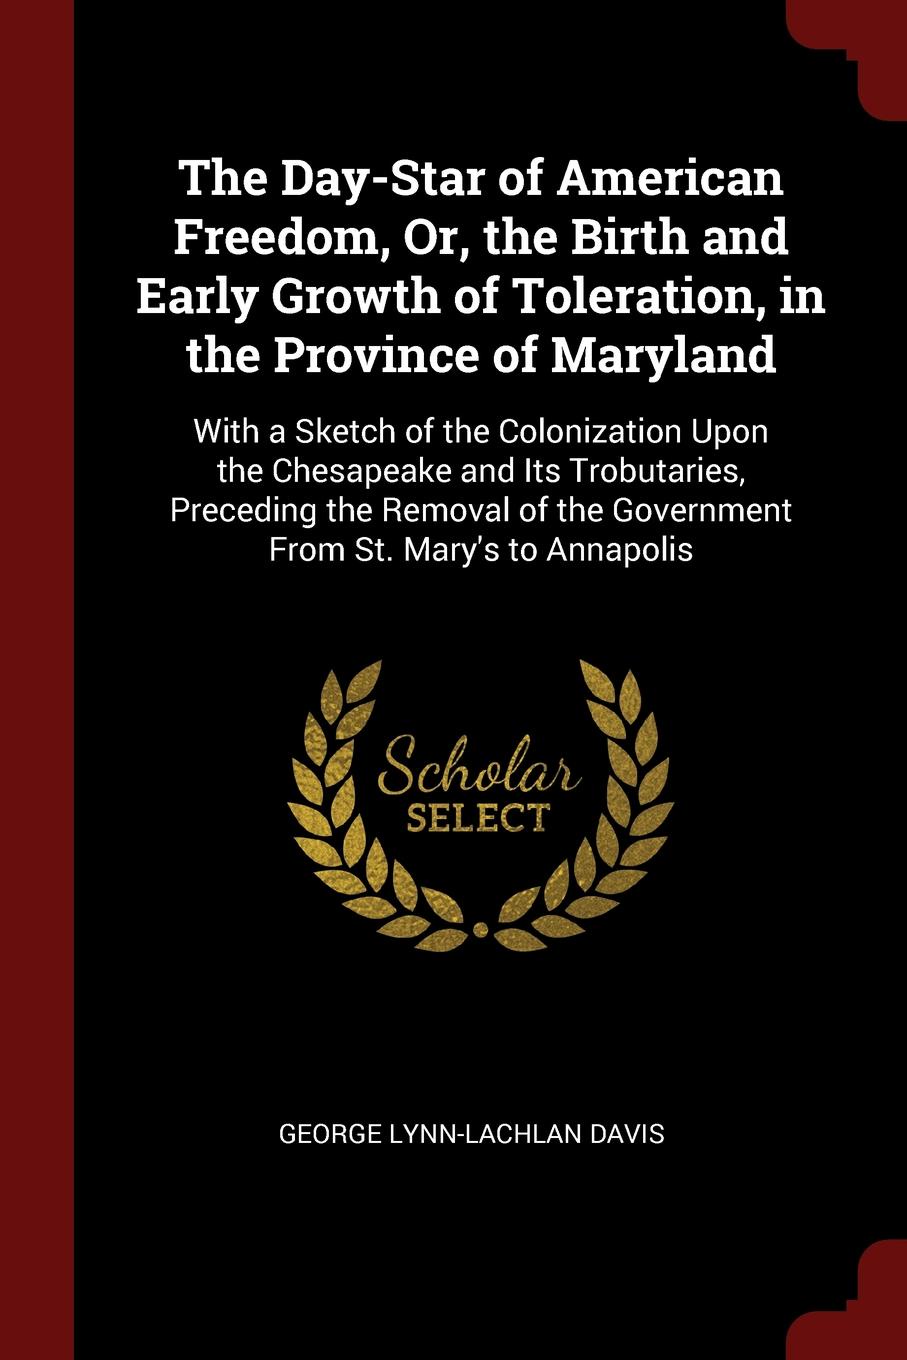 The Day-Star of American Freedom, Or, the Birth and Early Growth of Toleration, in the Province of Maryland. With a Sketch of the Colonization Upon the Chesapeake and Its Trobutaries, Preceding the Removal of the Government From St. Mary`s to Anna...